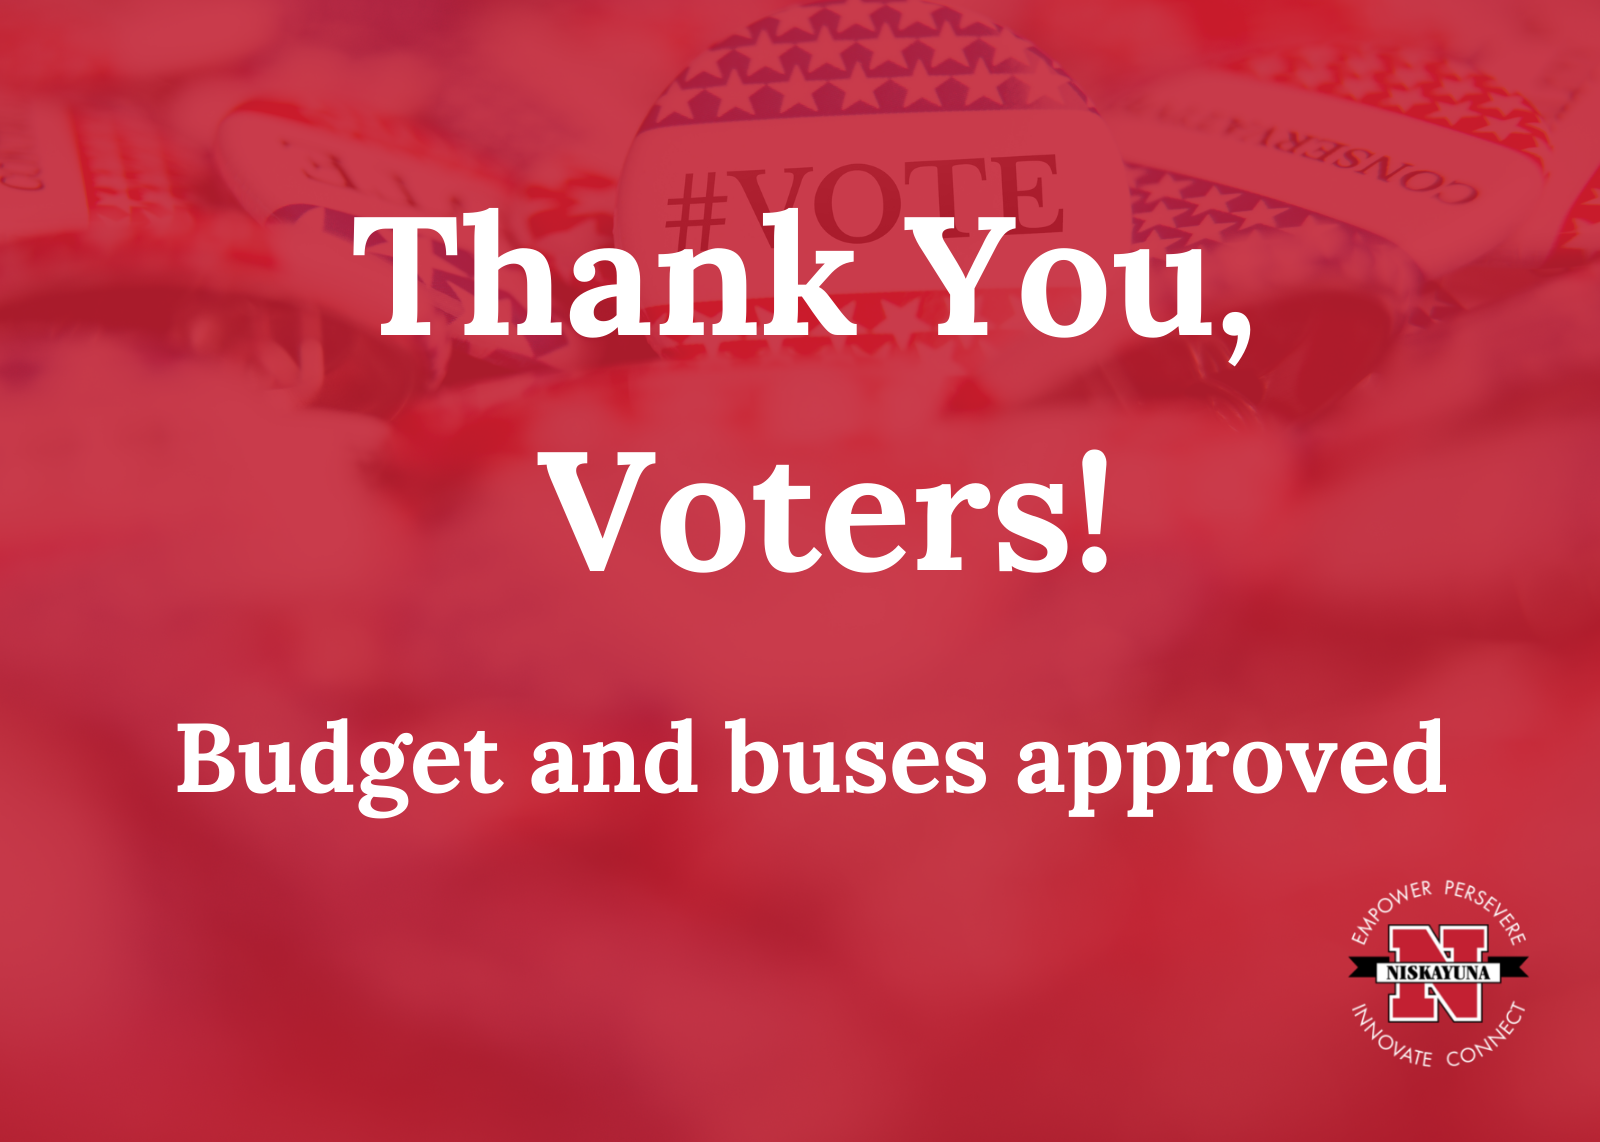 vote buttons with text that says thank you voters, budget and buses approved